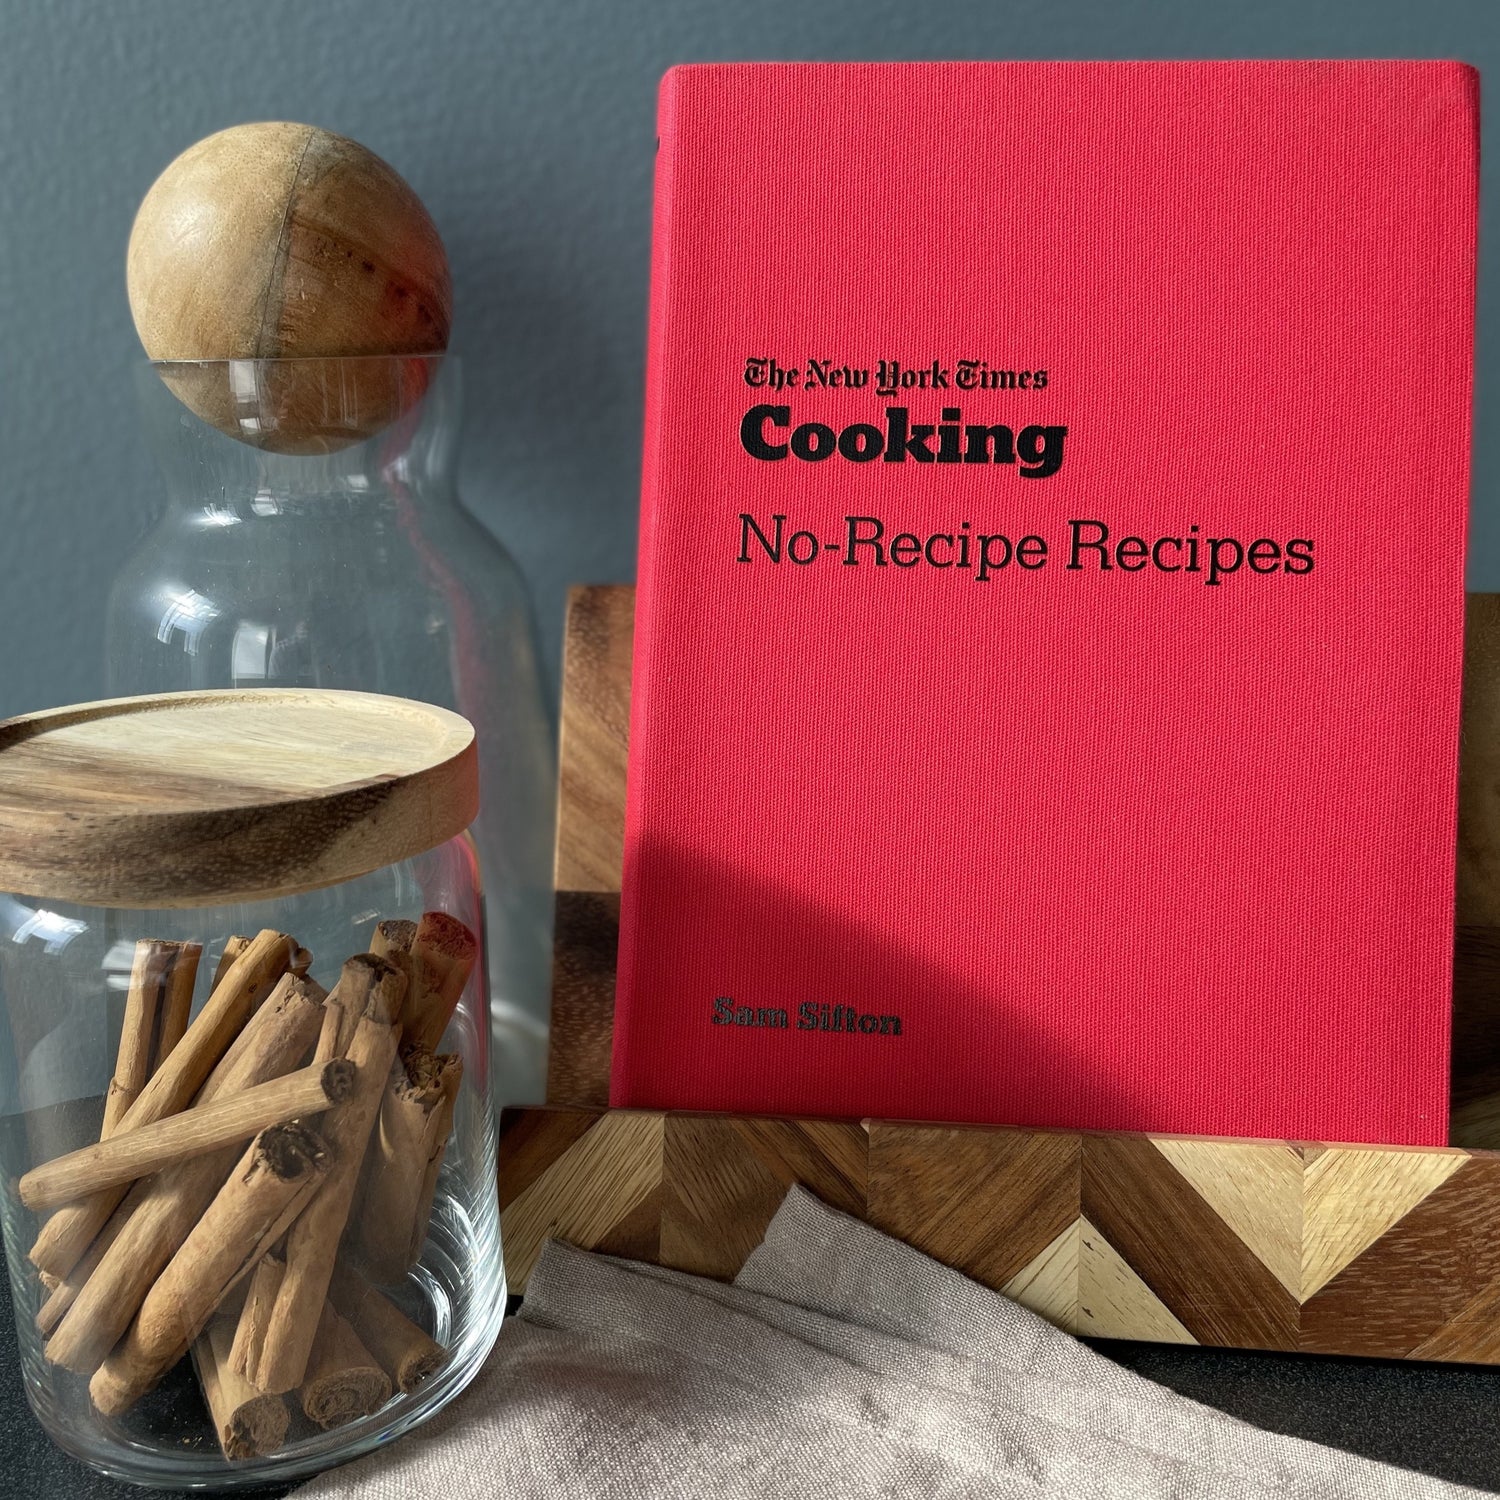 The New York Times Cooking No-Recipe Recipes By Sam Sifton